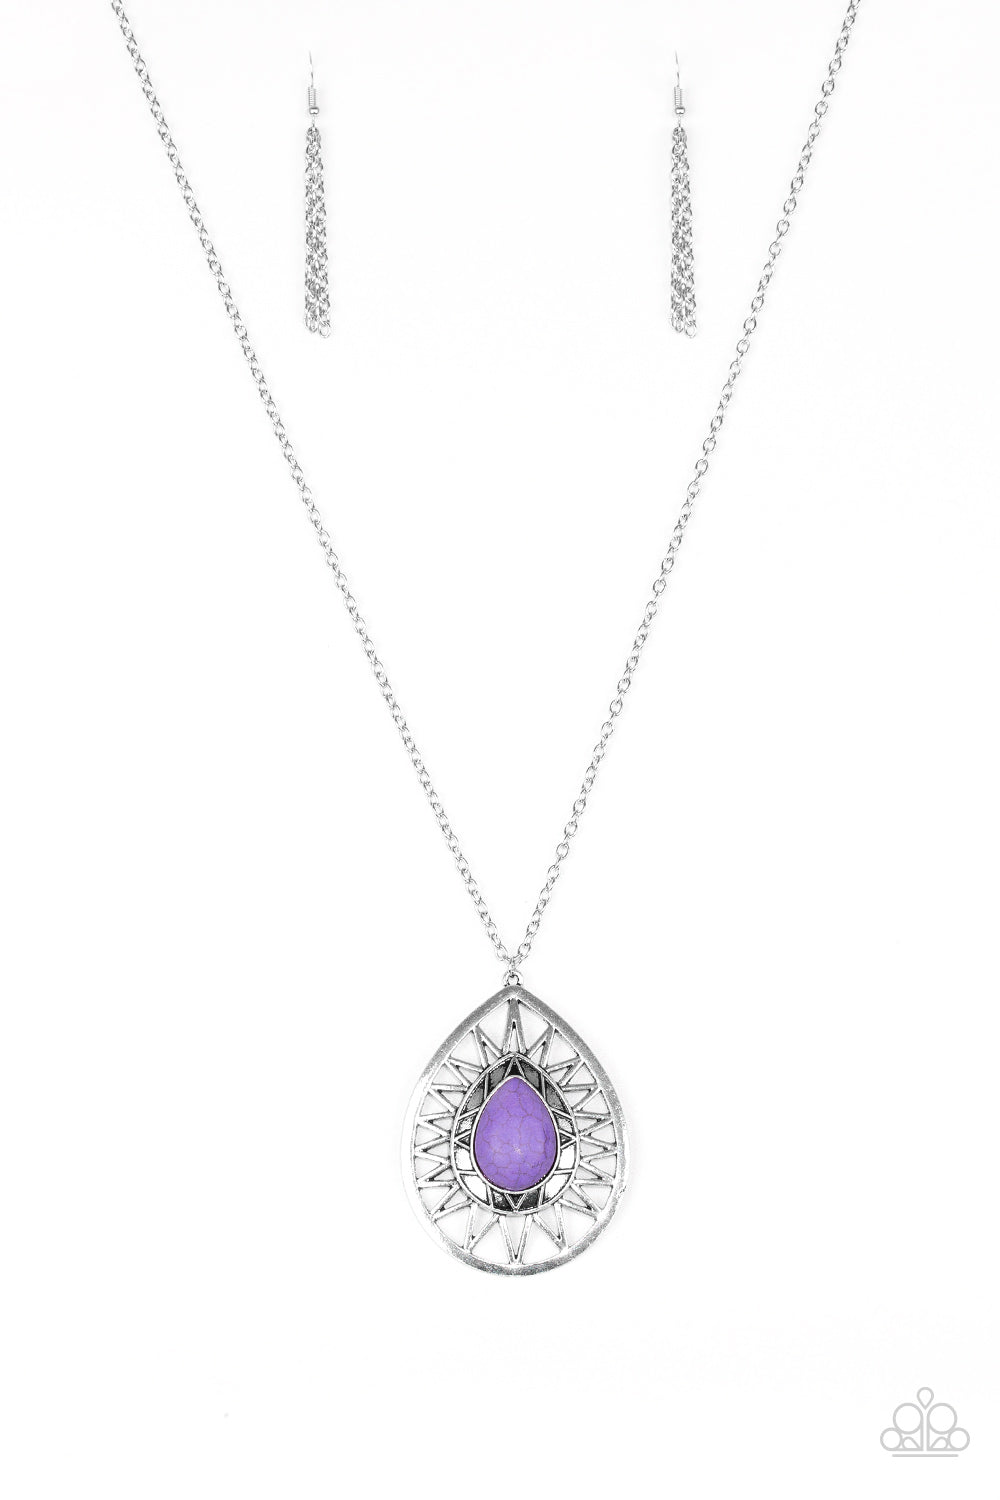 Summer Sunbeam - Purple Stone and Silver Necklace - Paparazzi Accessories - A vivacious purple stone is pressed into the center of a large silver teardrop radiating with shimmery sunburst patterns. The tribal inspired pendant swings from the bottom of a lengthened silver chain for a dramatic look. Features an adjustable clasp closure.